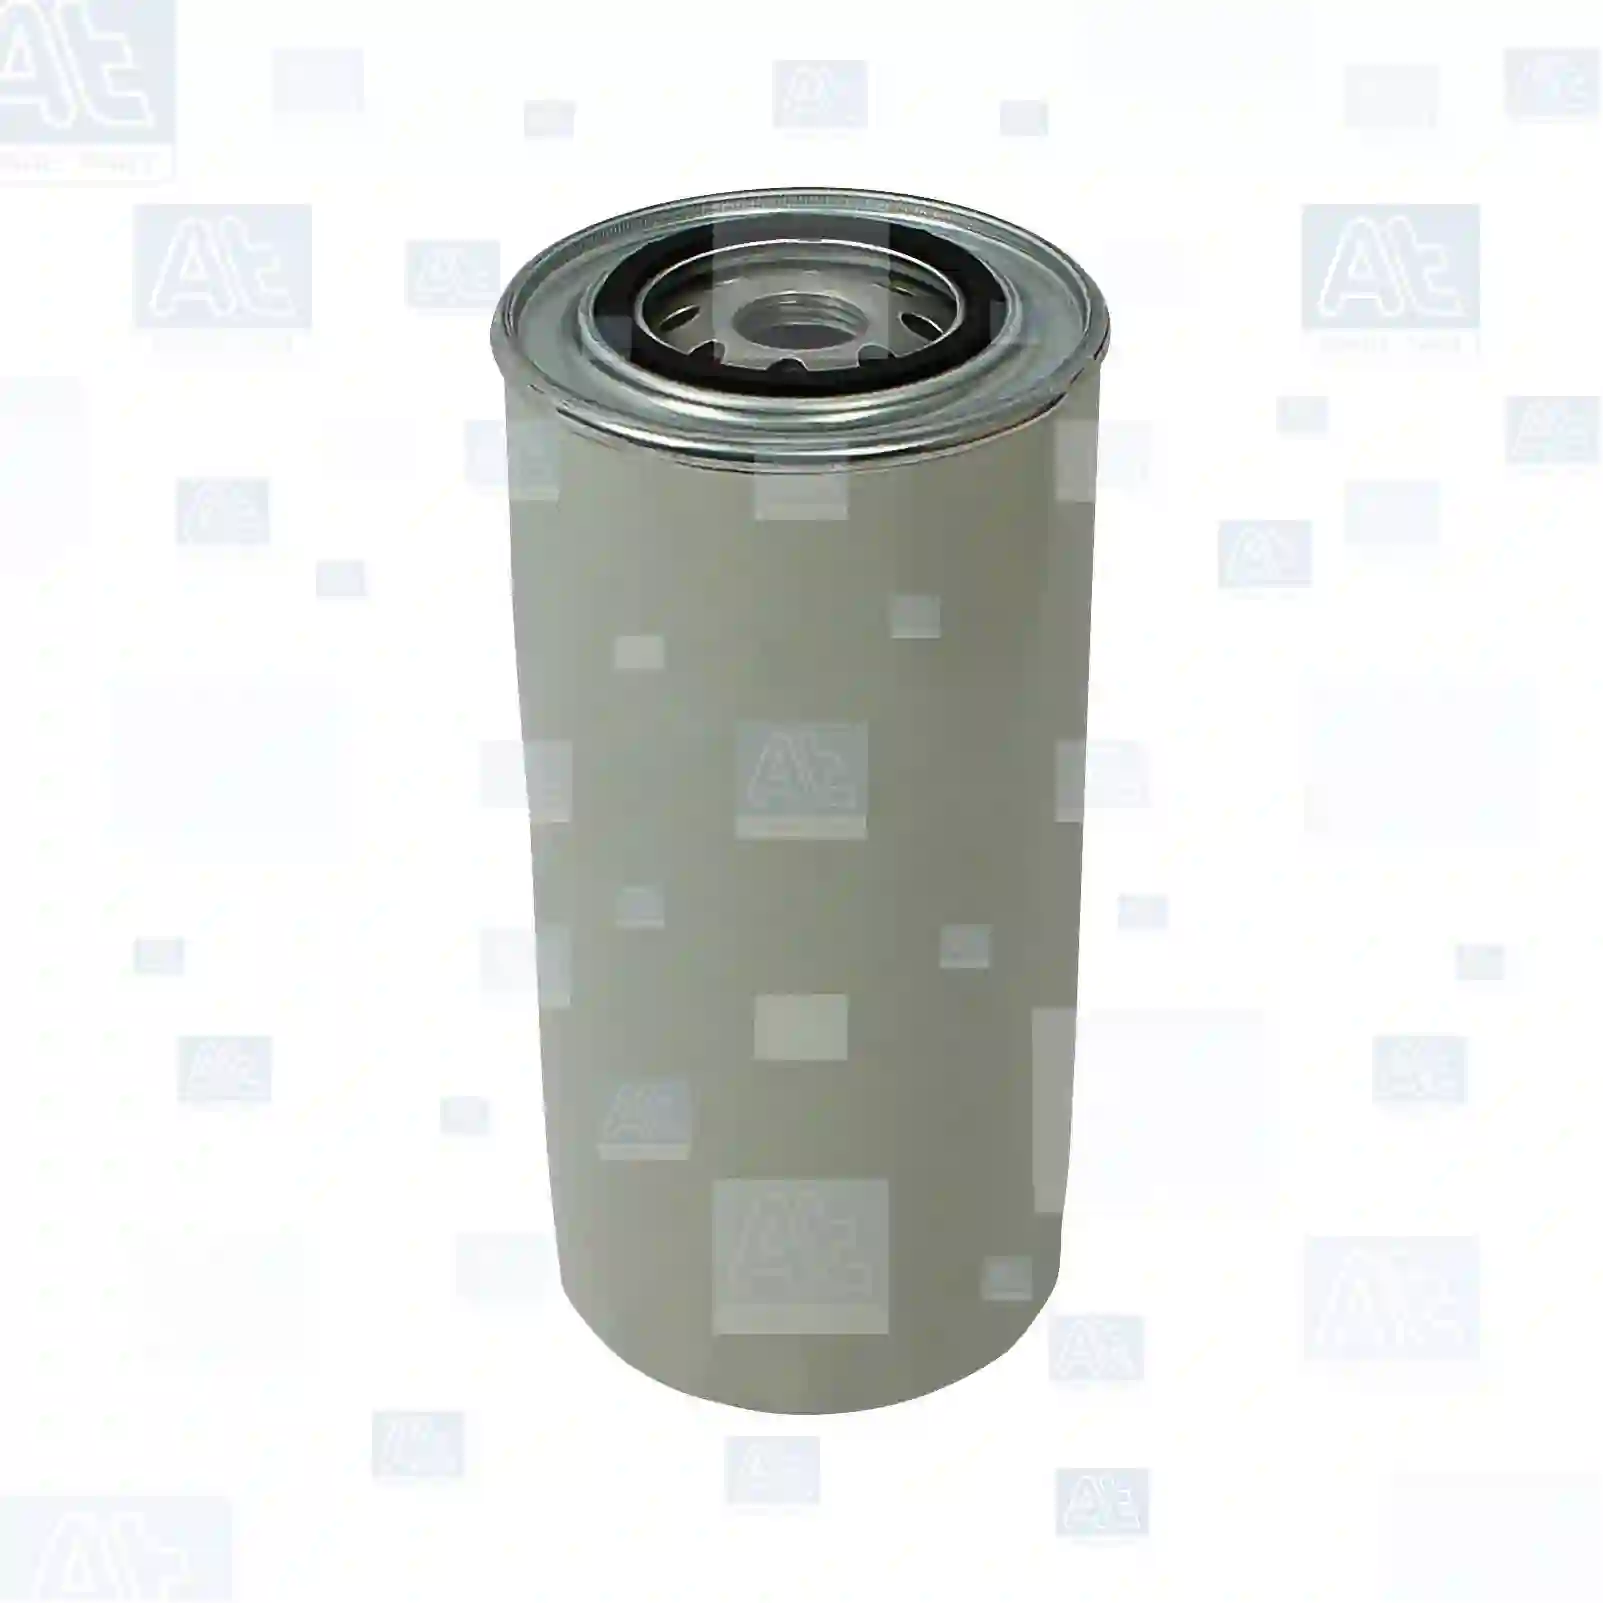 Oil filter, at no 77701589, oem no: 4667338, 4667339, 4667755, 8826586, 00048003, 01901604, 79026104, 01909137, 905411880011, 00048003, 00437072, 01836107, 01901604, 01907570, 01909137, 01930544, 04667338, 04667339, 08826586, 704667755, 71901604, 71909137, 74663338, 74667338, 74667339, 74667755, 78826586, 79026104, 437072, 5011420, ABPN10GLF3393, DNP551604, 7984920, 01901604, 01907570, 1901604, 1907570, 78826586, 01901604, 01909137, 04667338, 04667339, 04667755, 61589106, 79026104, 905411880011, 01930544, AMO42904, SE111B, SE111P, 5001846640, 6005019743, FD8320, ABU8533, SH8149, 808420, 80842000, 3338079, 2TB115561, TAE115561, 11959335100 At Spare Part | Engine, Accelerator Pedal, Camshaft, Connecting Rod, Crankcase, Crankshaft, Cylinder Head, Engine Suspension Mountings, Exhaust Manifold, Exhaust Gas Recirculation, Filter Kits, Flywheel Housing, General Overhaul Kits, Engine, Intake Manifold, Oil Cleaner, Oil Cooler, Oil Filter, Oil Pump, Oil Sump, Piston & Liner, Sensor & Switch, Timing Case, Turbocharger, Cooling System, Belt Tensioner, Coolant Filter, Coolant Pipe, Corrosion Prevention Agent, Drive, Expansion Tank, Fan, Intercooler, Monitors & Gauges, Radiator, Thermostat, V-Belt / Timing belt, Water Pump, Fuel System, Electronical Injector Unit, Feed Pump, Fuel Filter, cpl., Fuel Gauge Sender,  Fuel Line, Fuel Pump, Fuel Tank, Injection Line Kit, Injection Pump, Exhaust System, Clutch & Pedal, Gearbox, Propeller Shaft, Axles, Brake System, Hubs & Wheels, Suspension, Leaf Spring, Universal Parts / Accessories, Steering, Electrical System, Cabin Oil filter, at no 77701589, oem no: 4667338, 4667339, 4667755, 8826586, 00048003, 01901604, 79026104, 01909137, 905411880011, 00048003, 00437072, 01836107, 01901604, 01907570, 01909137, 01930544, 04667338, 04667339, 08826586, 704667755, 71901604, 71909137, 74663338, 74667338, 74667339, 74667755, 78826586, 79026104, 437072, 5011420, ABPN10GLF3393, DNP551604, 7984920, 01901604, 01907570, 1901604, 1907570, 78826586, 01901604, 01909137, 04667338, 04667339, 04667755, 61589106, 79026104, 905411880011, 01930544, AMO42904, SE111B, SE111P, 5001846640, 6005019743, FD8320, ABU8533, SH8149, 808420, 80842000, 3338079, 2TB115561, TAE115561, 11959335100 At Spare Part | Engine, Accelerator Pedal, Camshaft, Connecting Rod, Crankcase, Crankshaft, Cylinder Head, Engine Suspension Mountings, Exhaust Manifold, Exhaust Gas Recirculation, Filter Kits, Flywheel Housing, General Overhaul Kits, Engine, Intake Manifold, Oil Cleaner, Oil Cooler, Oil Filter, Oil Pump, Oil Sump, Piston & Liner, Sensor & Switch, Timing Case, Turbocharger, Cooling System, Belt Tensioner, Coolant Filter, Coolant Pipe, Corrosion Prevention Agent, Drive, Expansion Tank, Fan, Intercooler, Monitors & Gauges, Radiator, Thermostat, V-Belt / Timing belt, Water Pump, Fuel System, Electronical Injector Unit, Feed Pump, Fuel Filter, cpl., Fuel Gauge Sender,  Fuel Line, Fuel Pump, Fuel Tank, Injection Line Kit, Injection Pump, Exhaust System, Clutch & Pedal, Gearbox, Propeller Shaft, Axles, Brake System, Hubs & Wheels, Suspension, Leaf Spring, Universal Parts / Accessories, Steering, Electrical System, Cabin